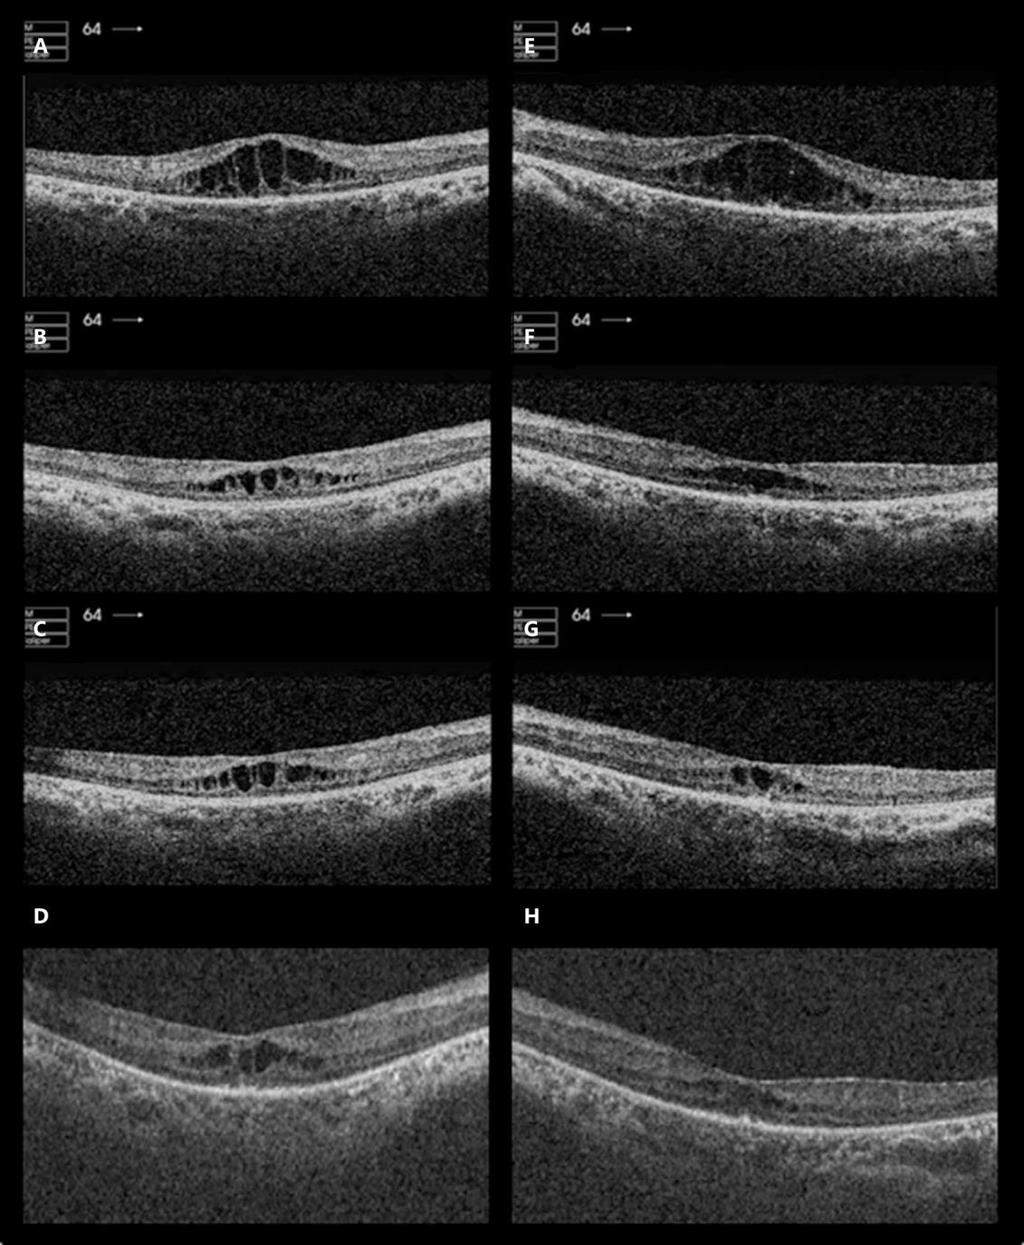 394 Fig. 1. OCT of both eyes before and after intravitreal injections of aflibercept given in the UK.